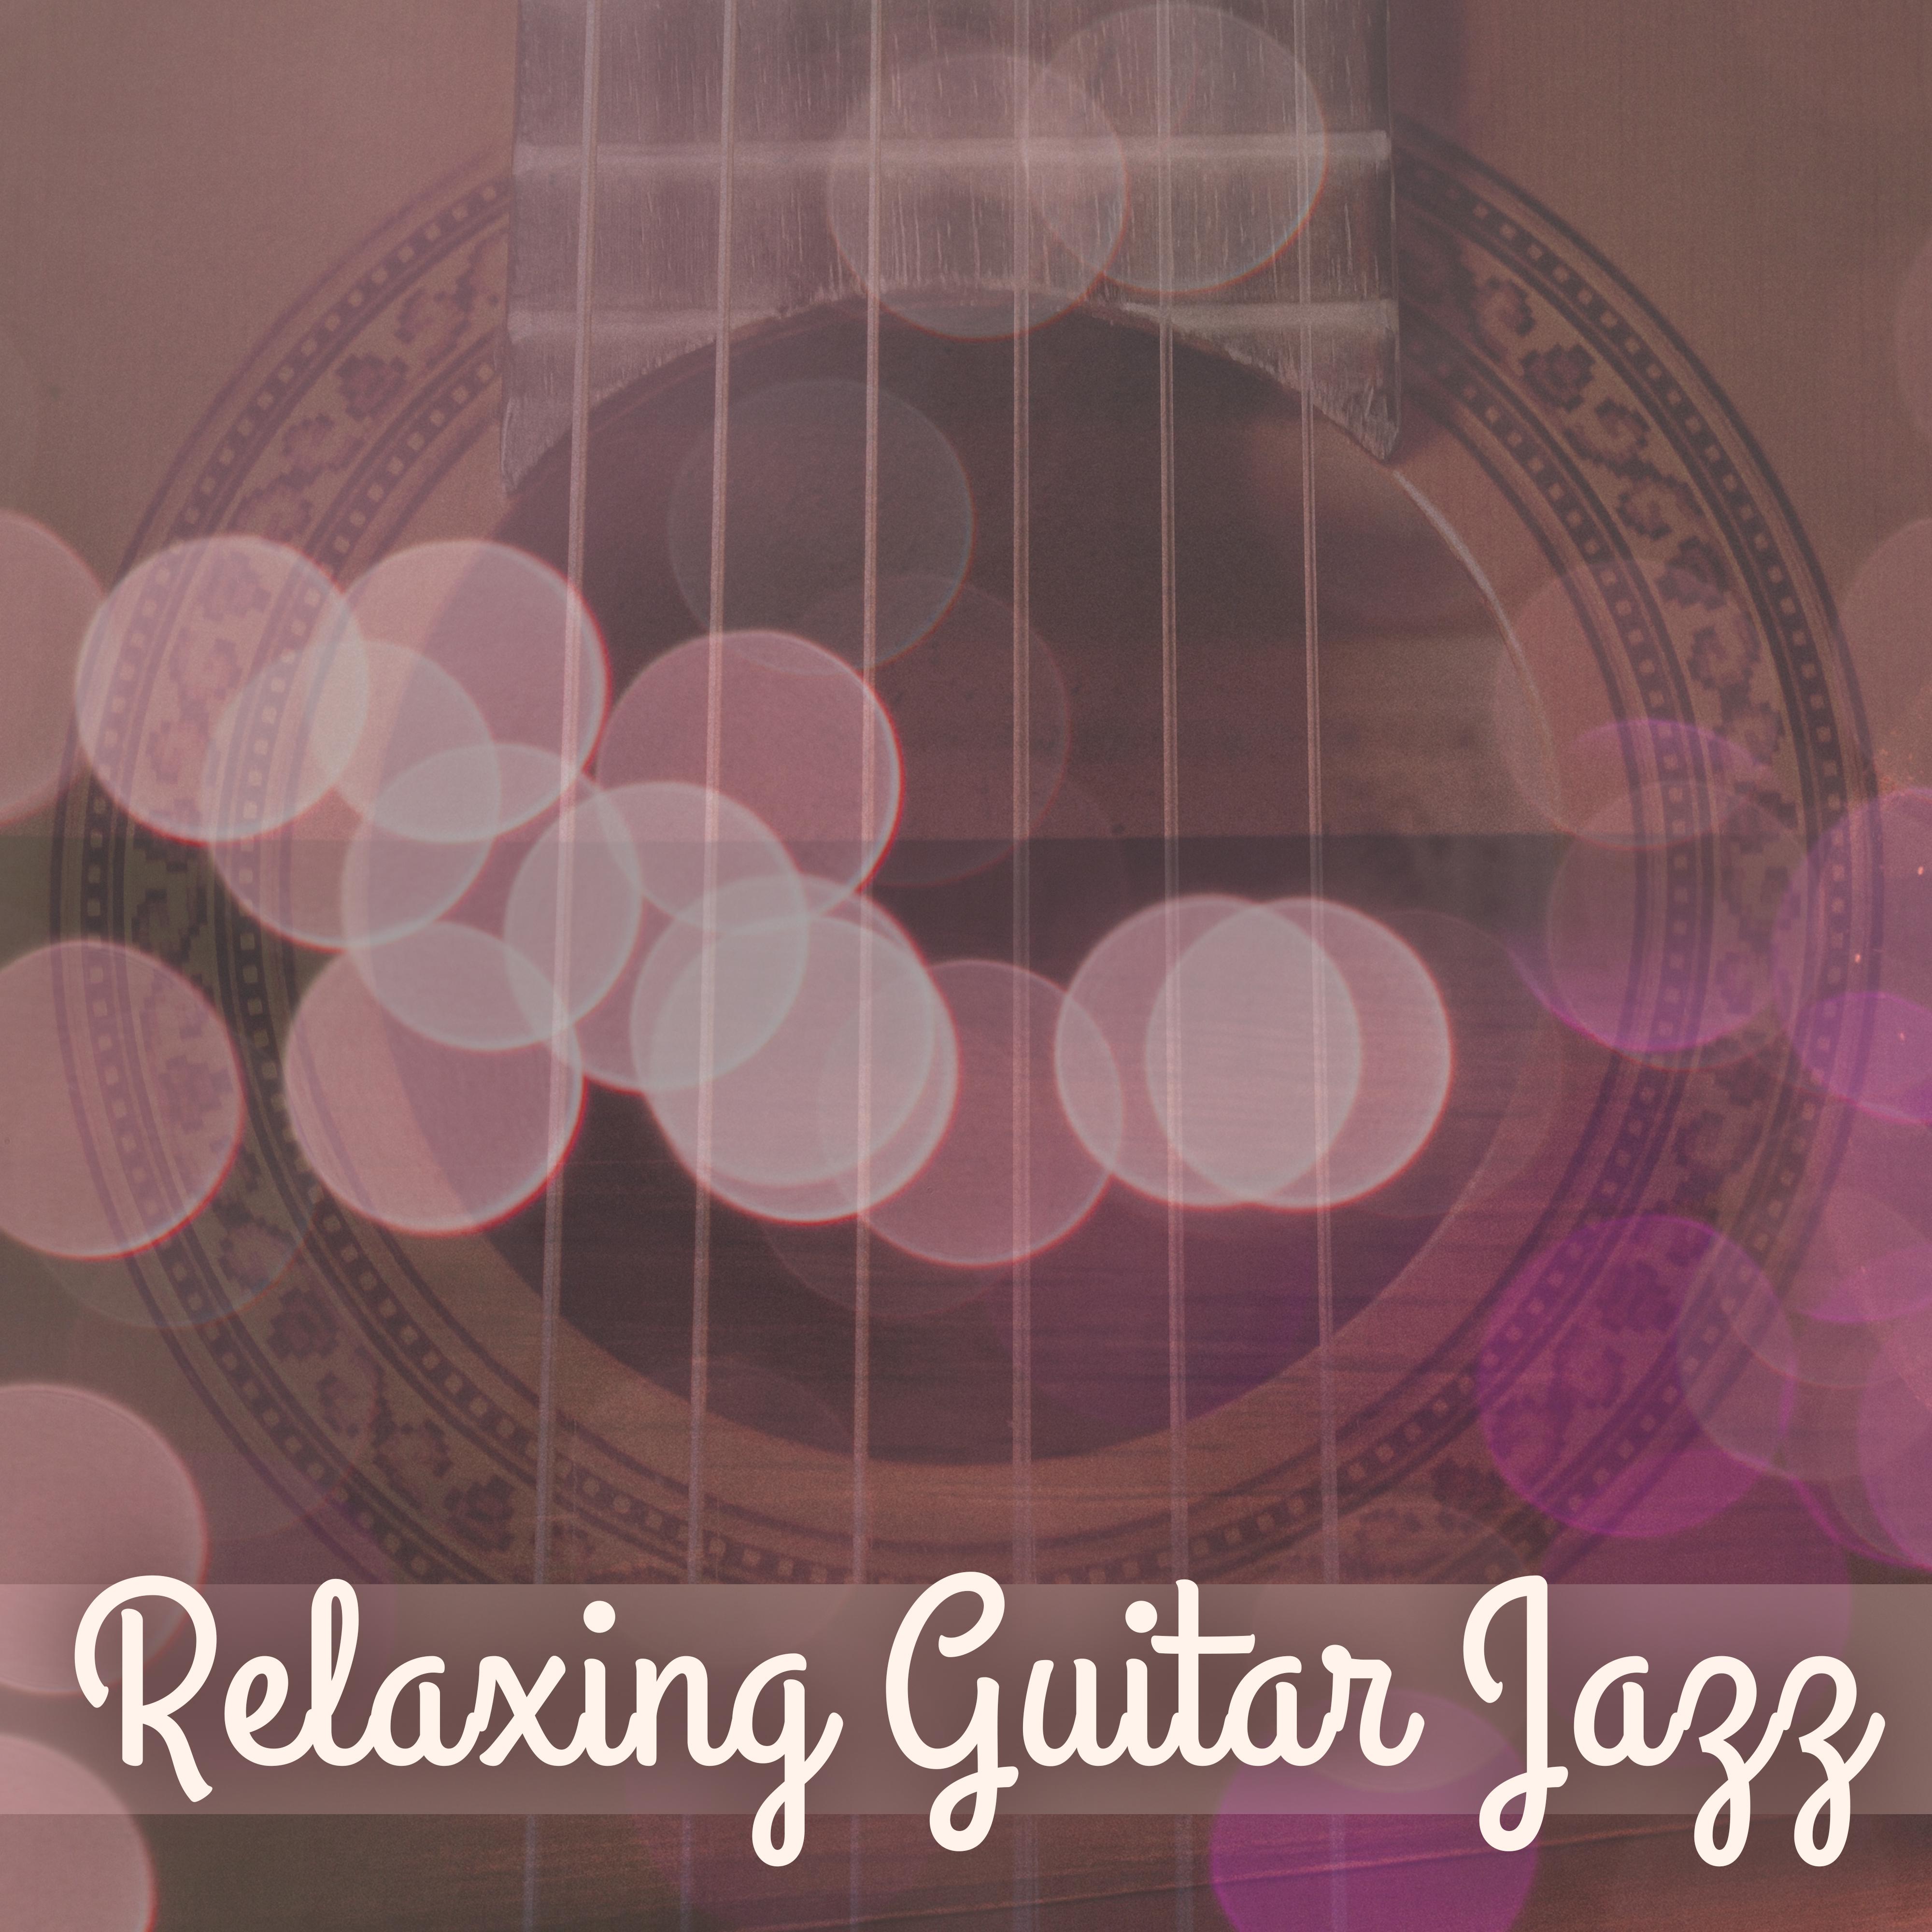 Relaxing Guitar Jazz – Smooth Jazz Music, Stress Relief, Easy Listening, Guitar Relaxation, Lazy Day